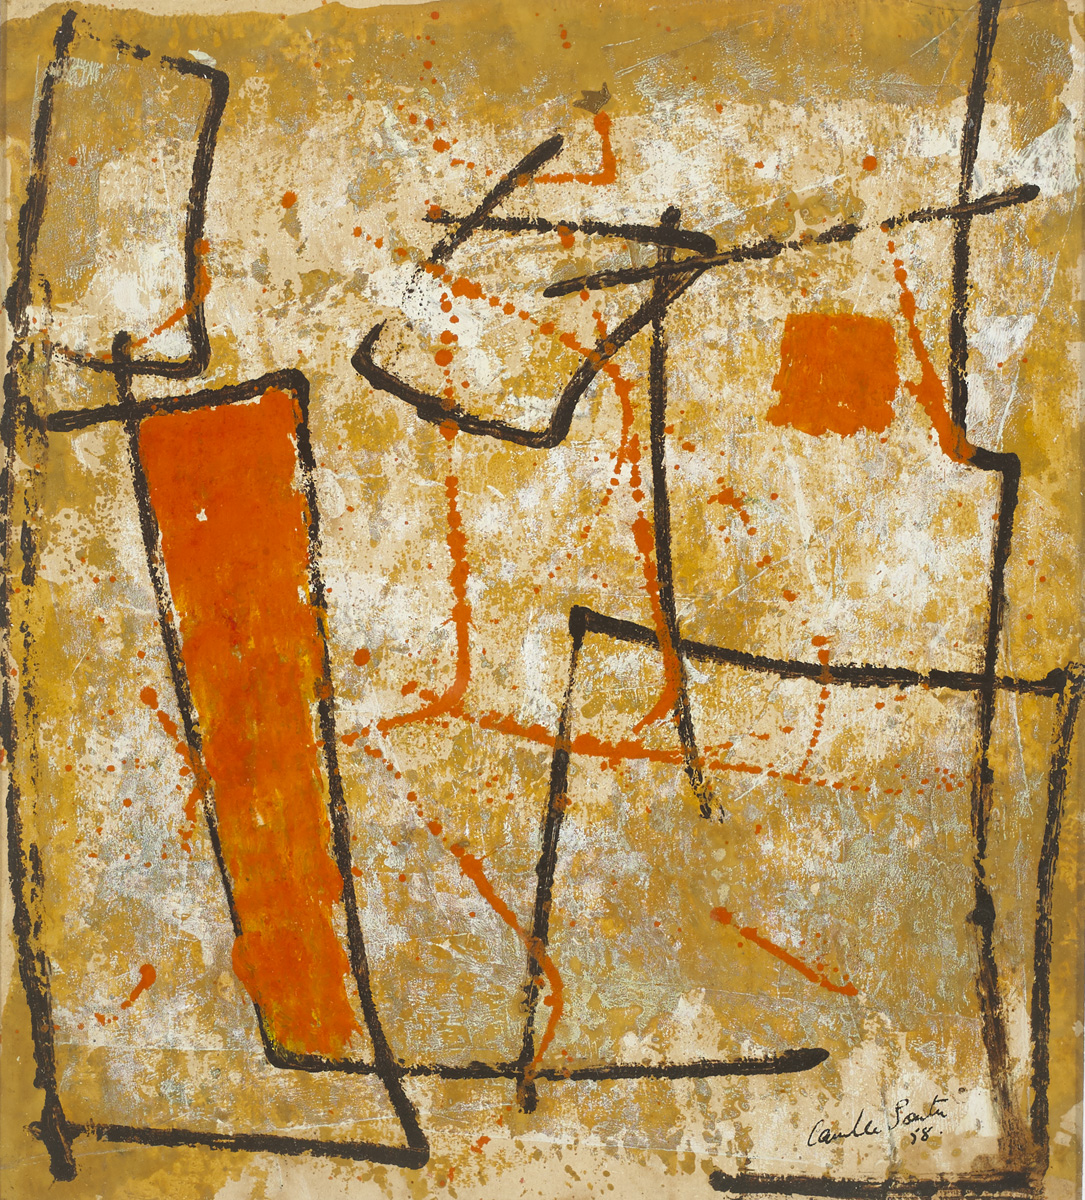 UNTITLED, 1958 by Camille Souter sold for 5,700 at Whyte's Auctions